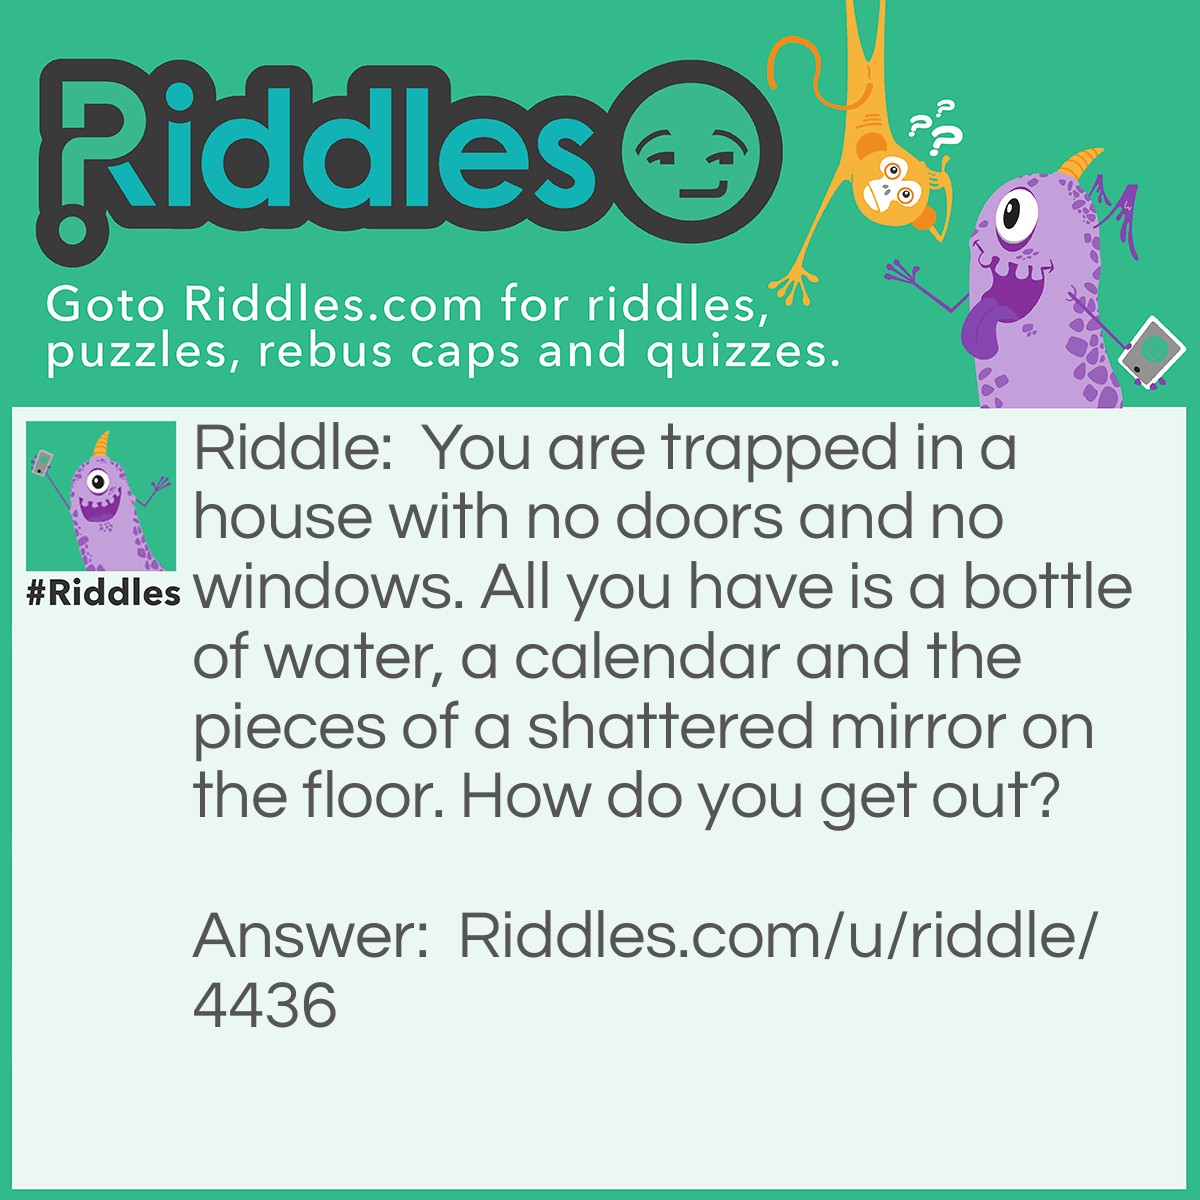 Riddle: You are trapped in a house with no doors and no windows. All you have is a bottle of water, a calendar and the pieces of a shattered mirror on the floor. How do you get out? Answer: To survive while your are piecing the mirror together, you eat the dates from the calendar and drink from the water. Then you look into the mirror to see what you saw, then use the saw to cut through the wall.